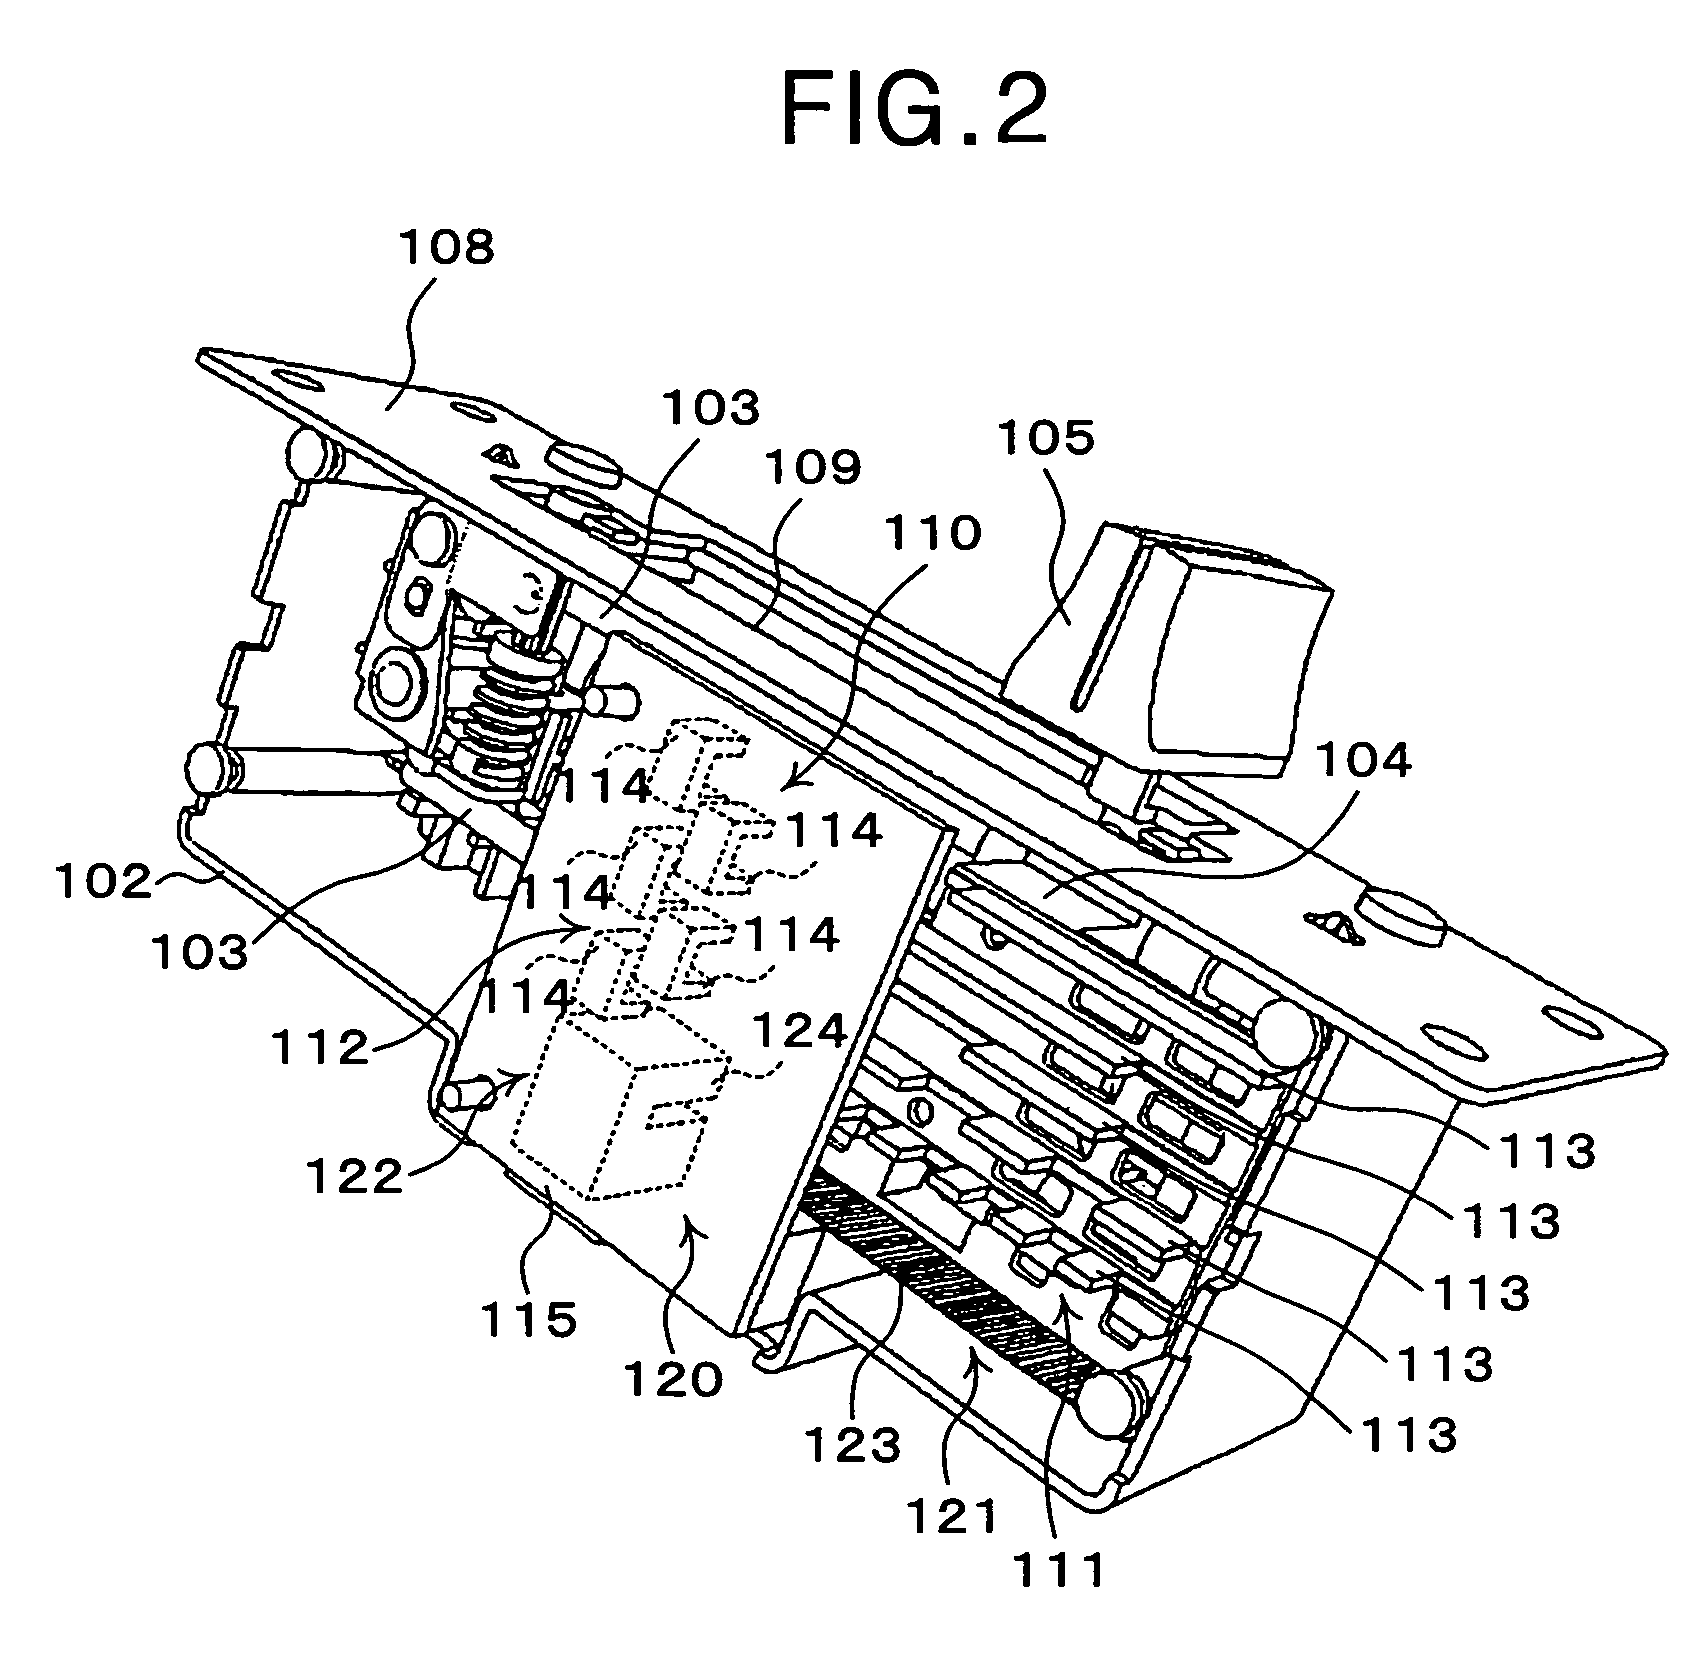 Apparatus for adjusting a signal based on a position of a movable member